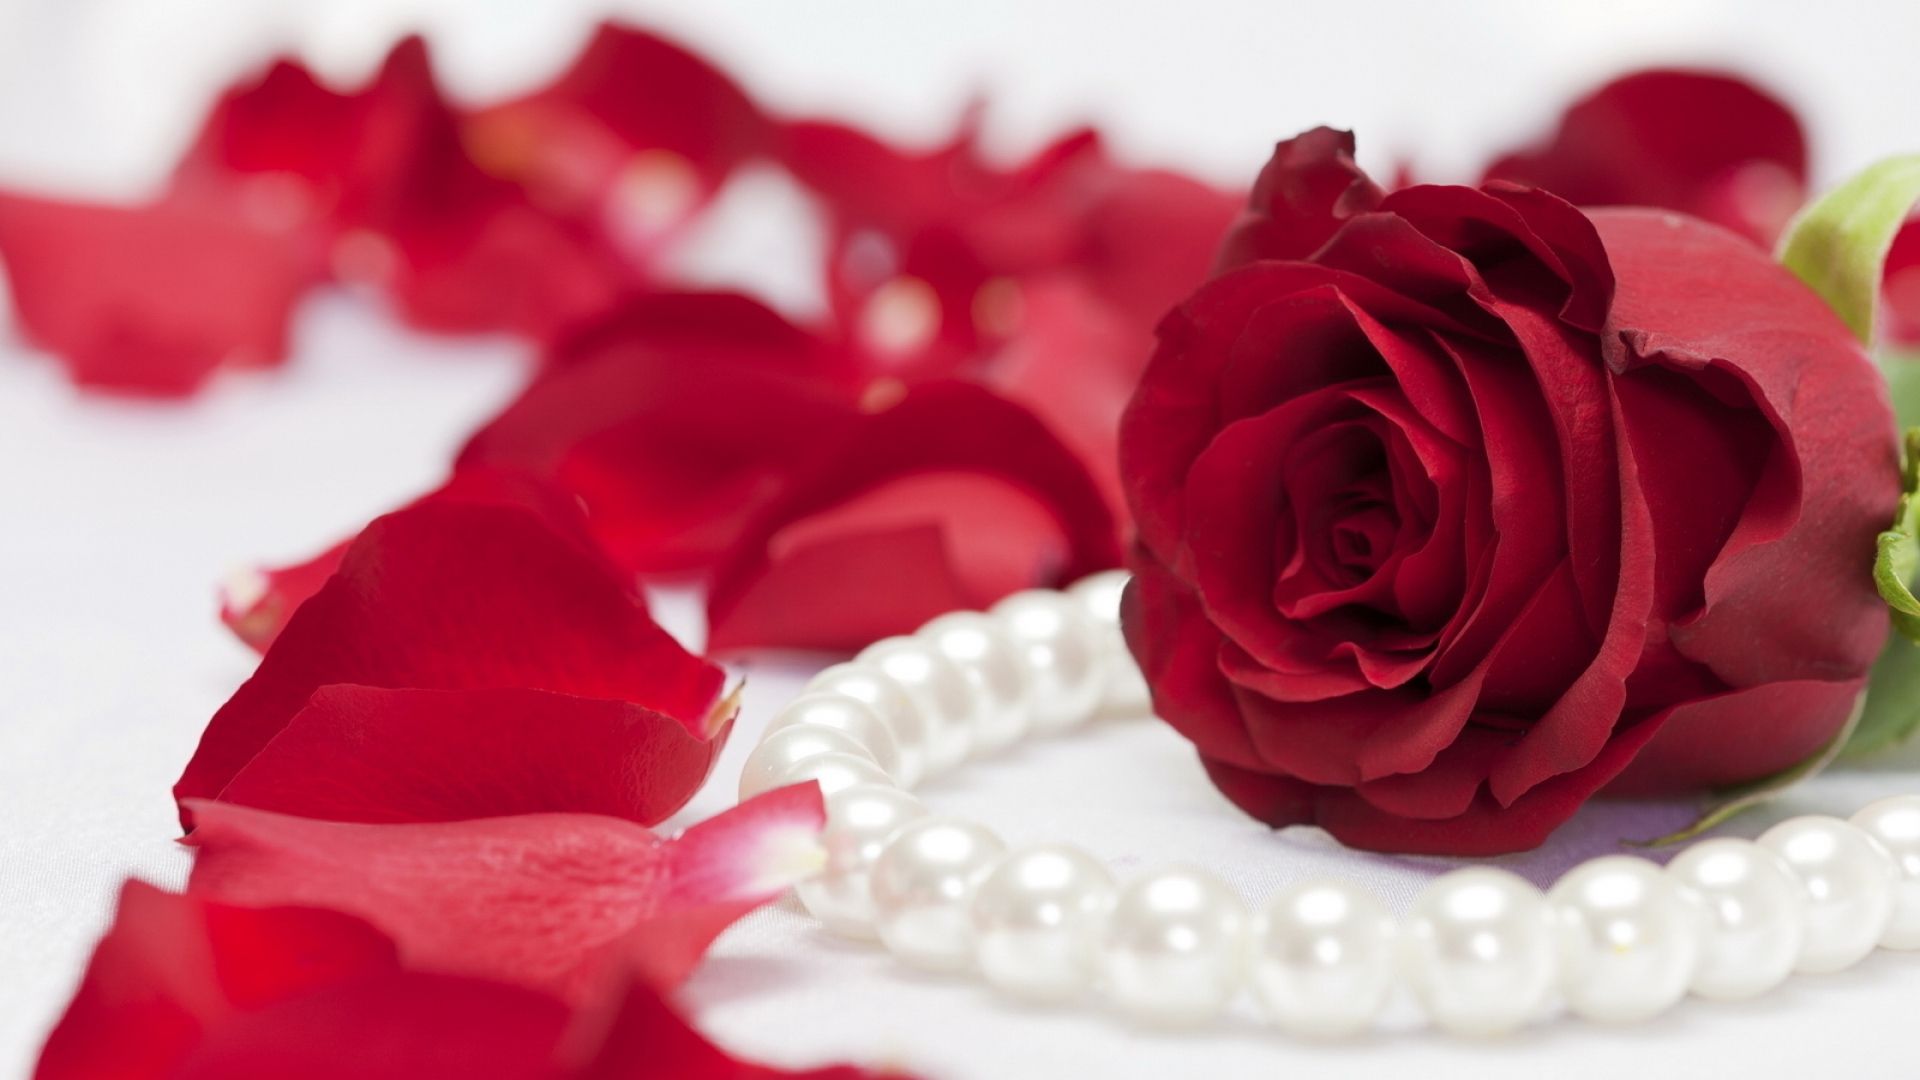 Download Wallpaper Rose, Flower, Pearls, Jewelry, Petals - Romantic Wedding Anniversary Wishes For Husband - HD Wallpaper 